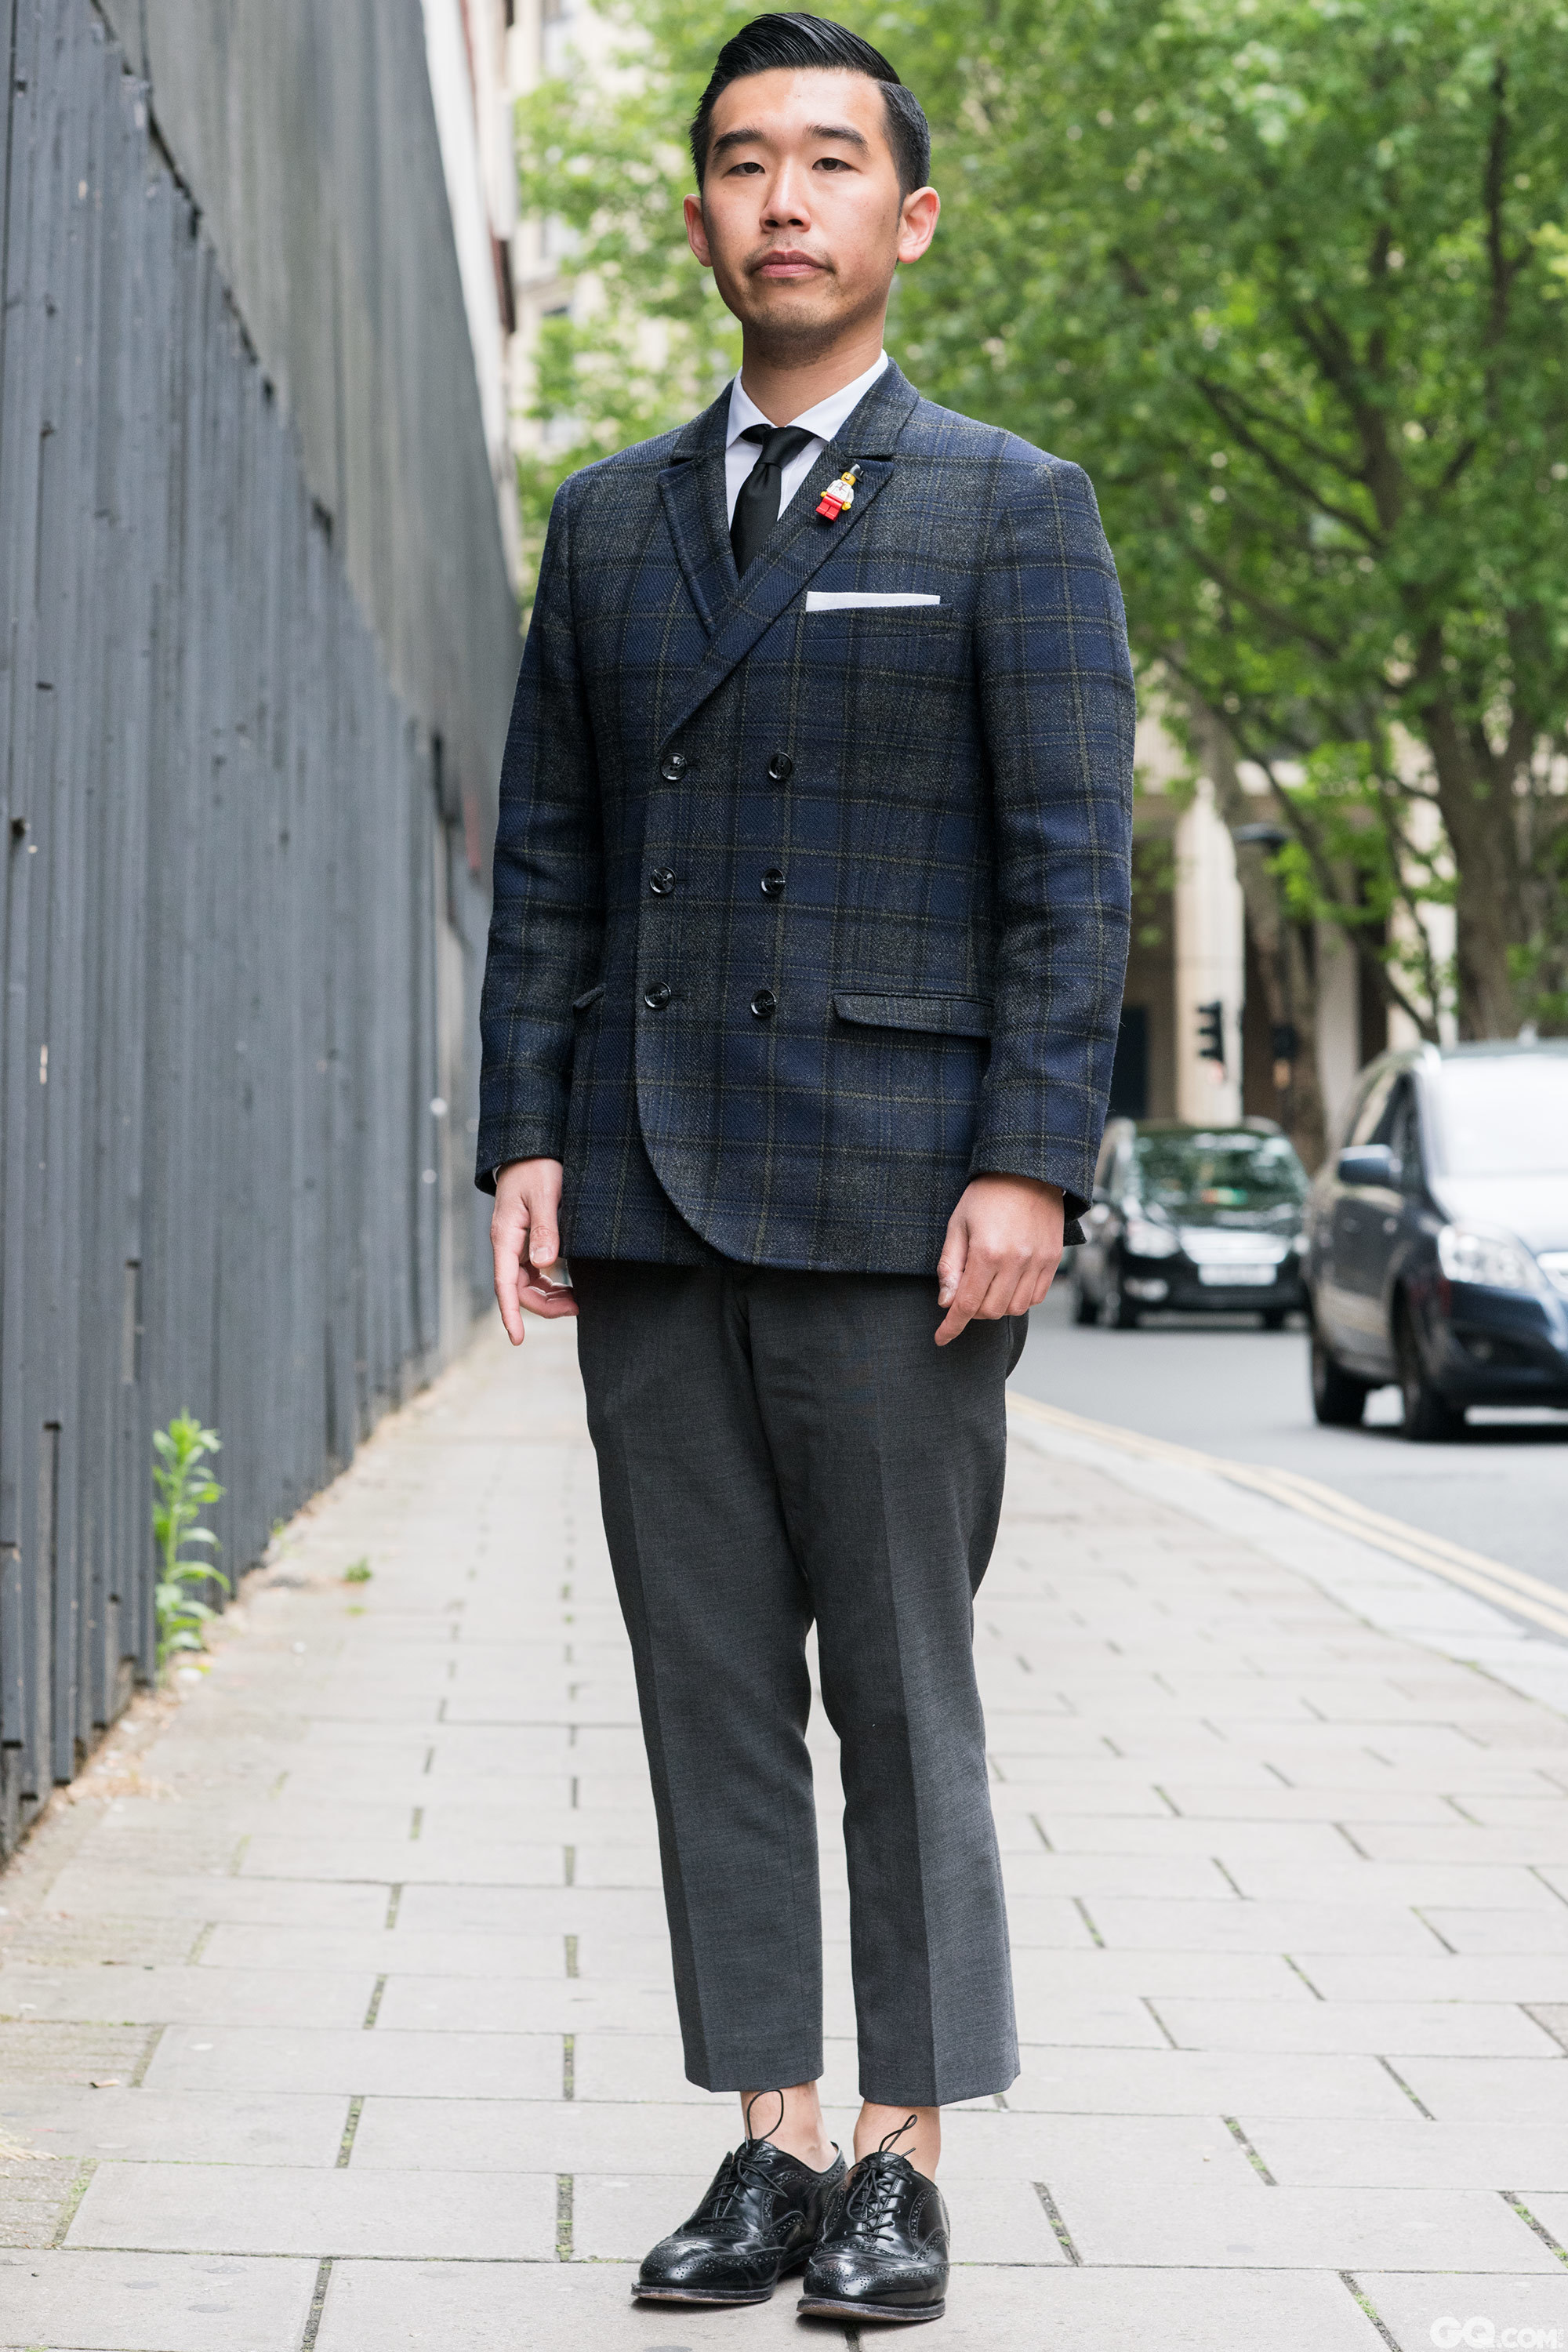 Jun
All Look: Tiger of Sweden
Shoes: vintage

Inspiration: My inspiration today was classic British tailoring with a Japanese influence with a nice grey/blue contrast. 我今天的灵感来源于经典英式定制与日本元素的结合。